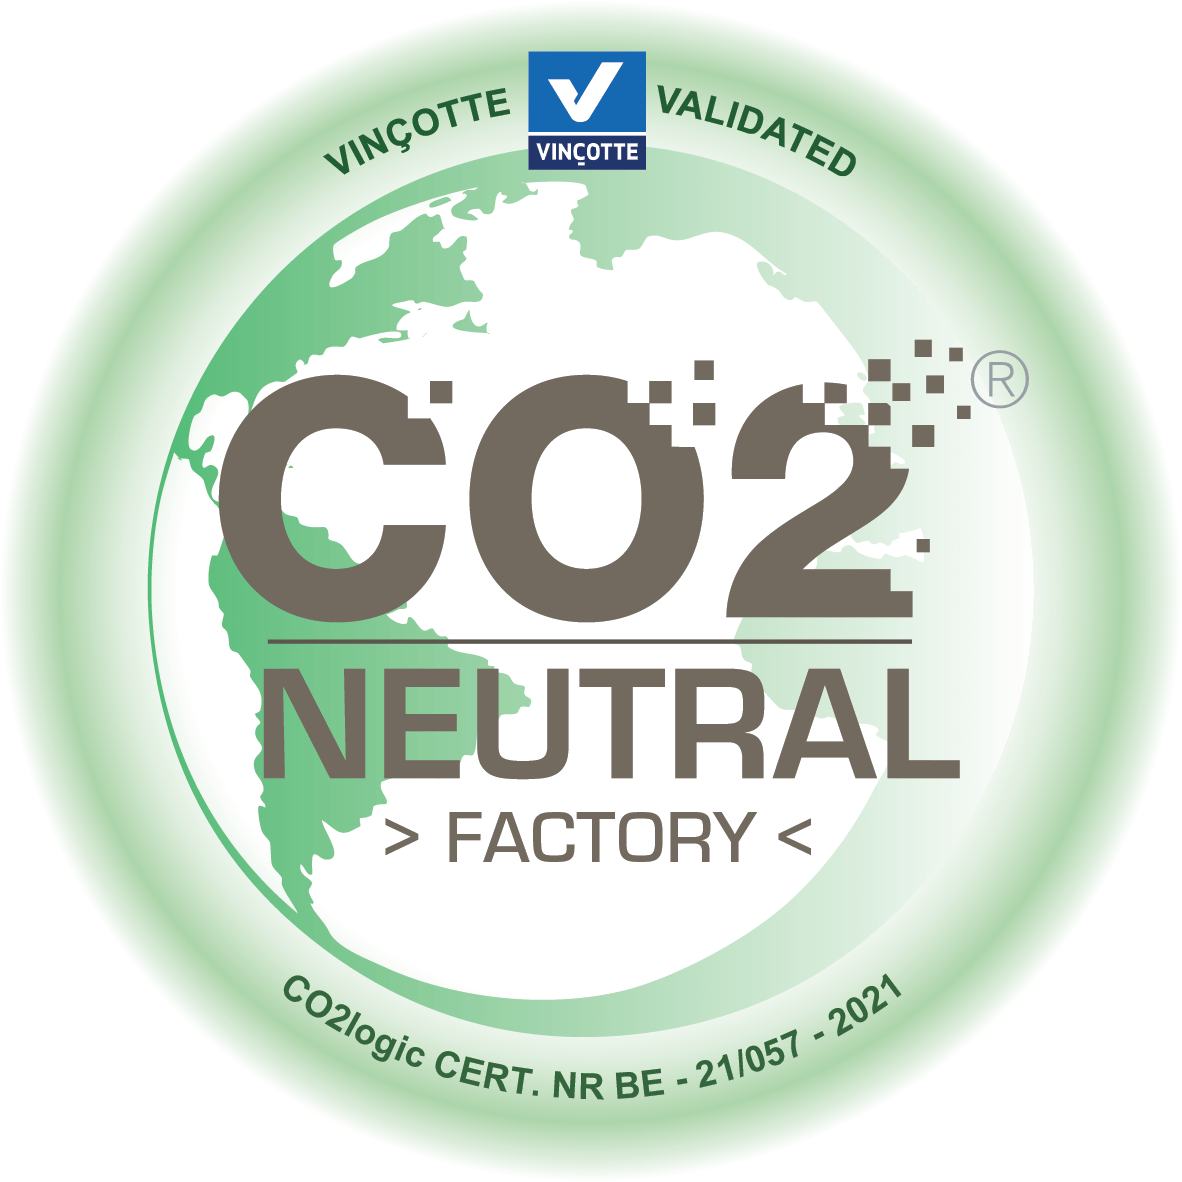 Co2_Neutral_Factory-01